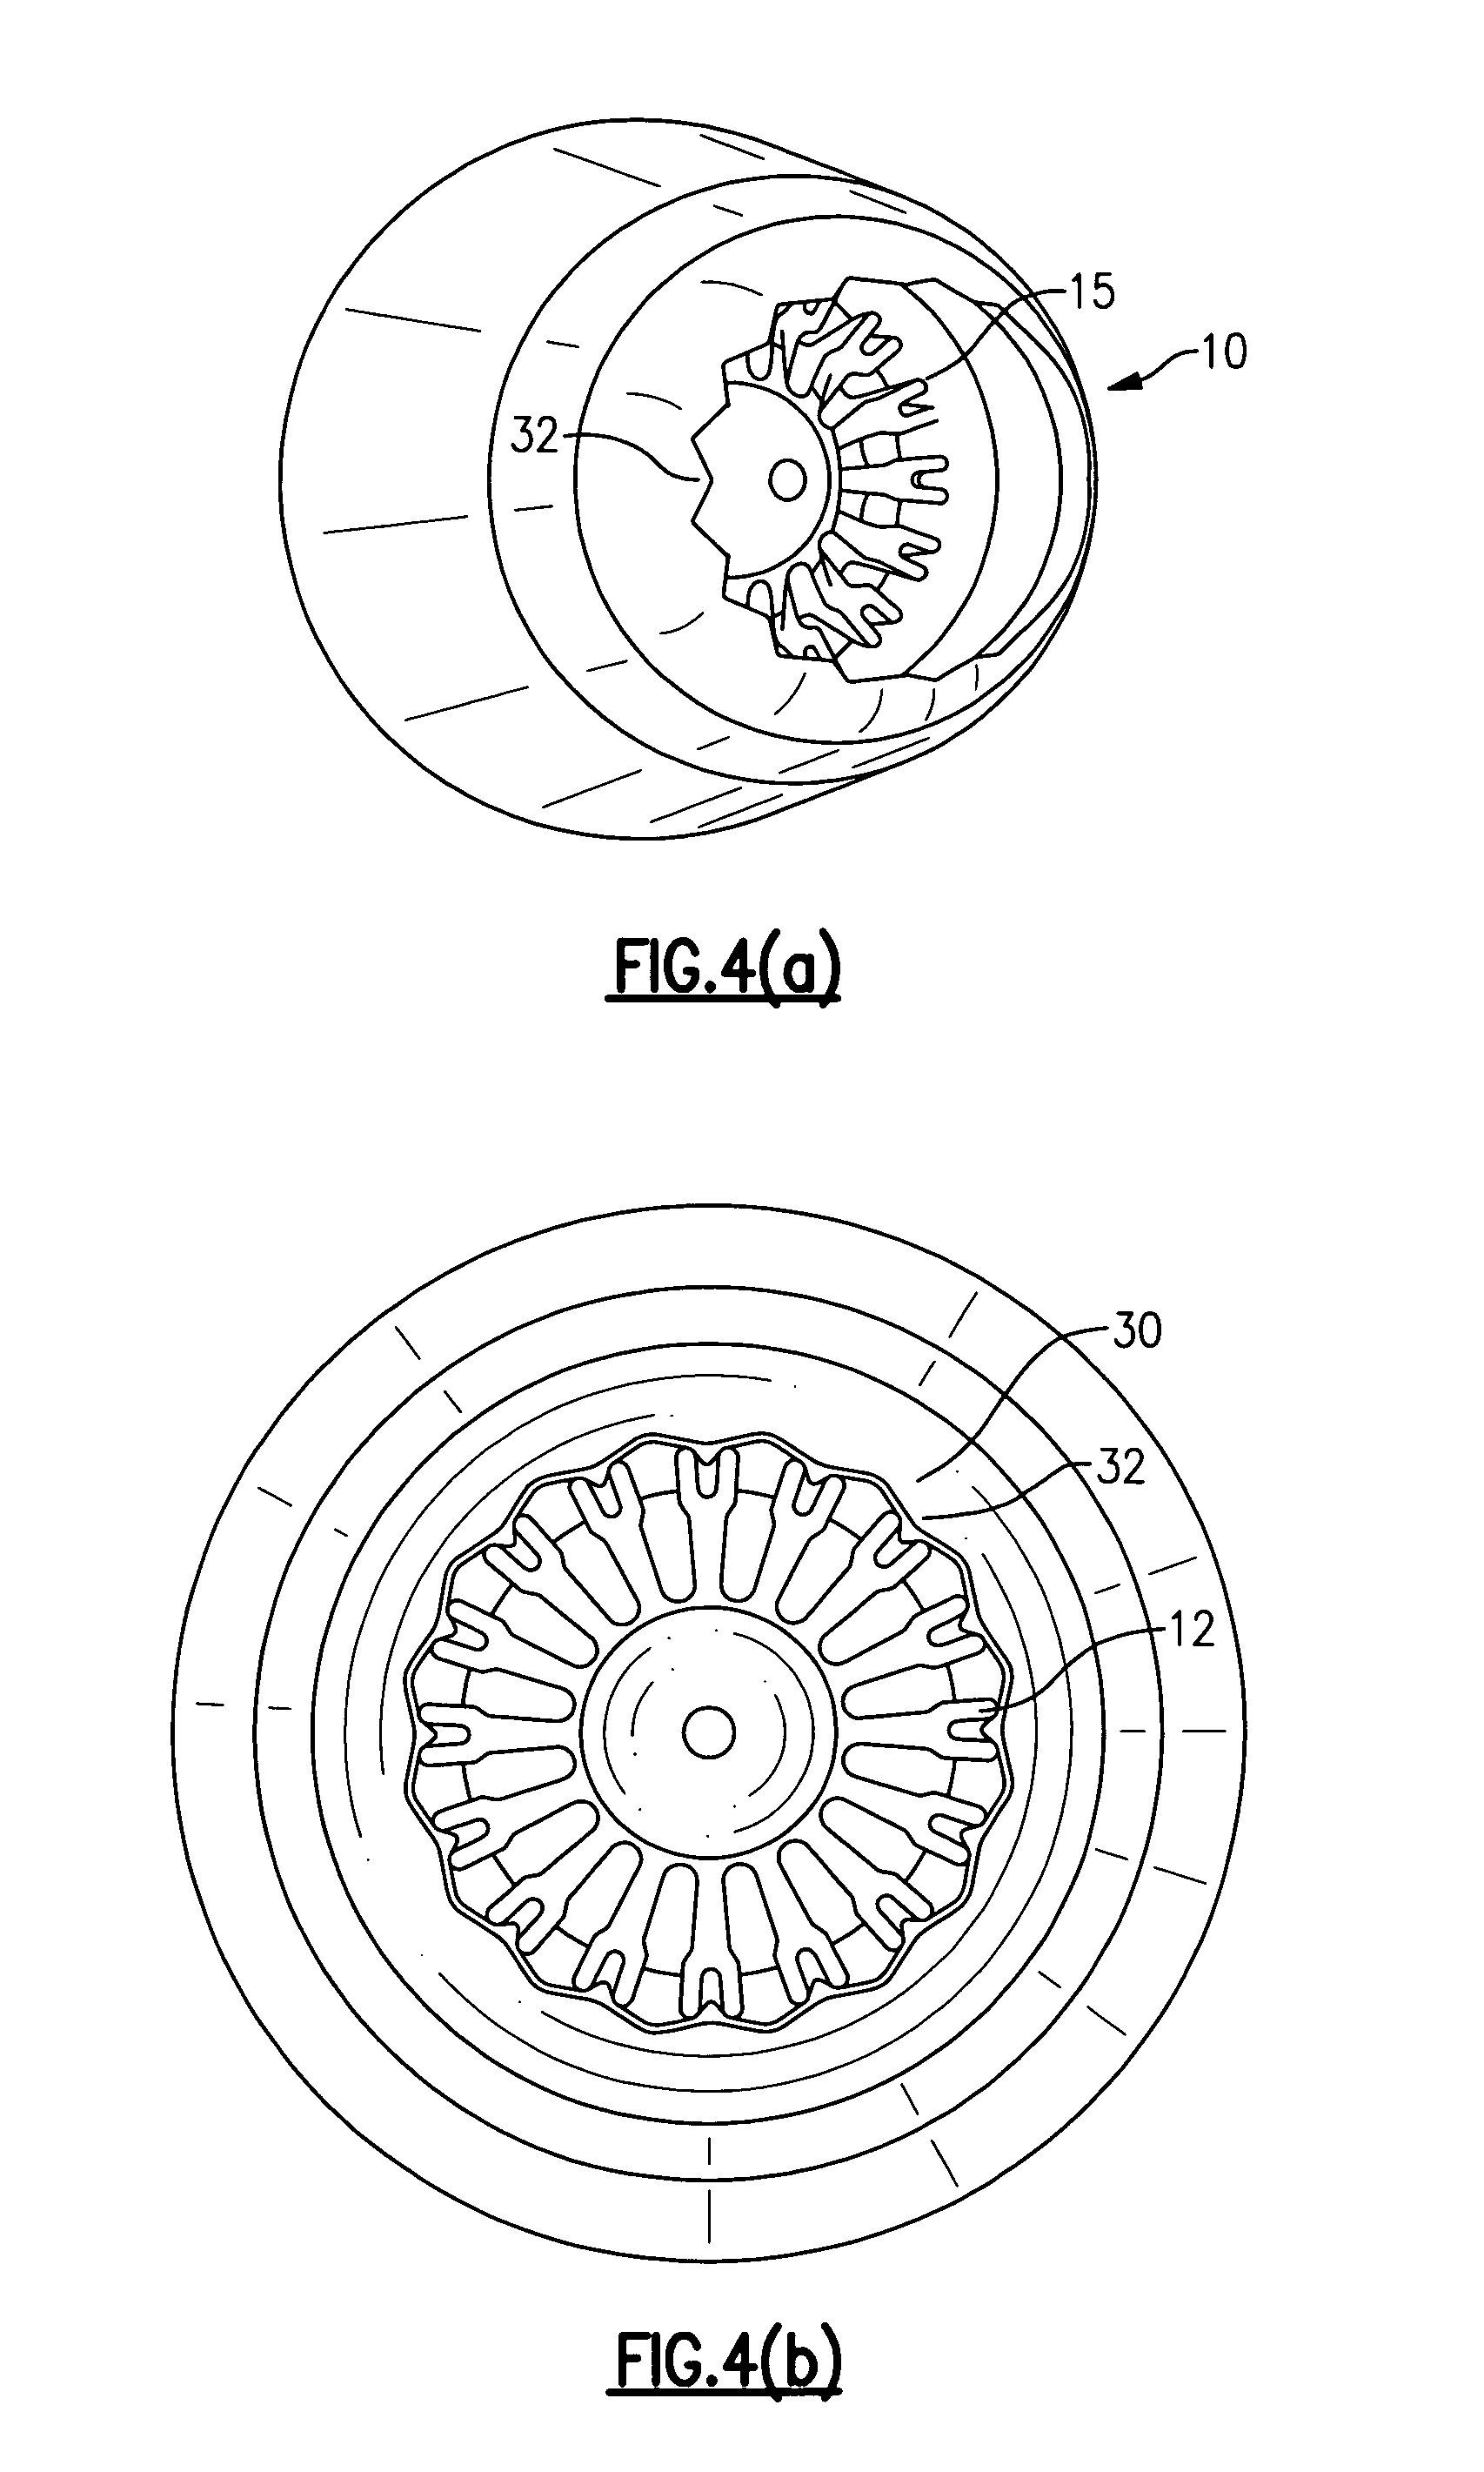 Jet exhaust noise reduction system and method